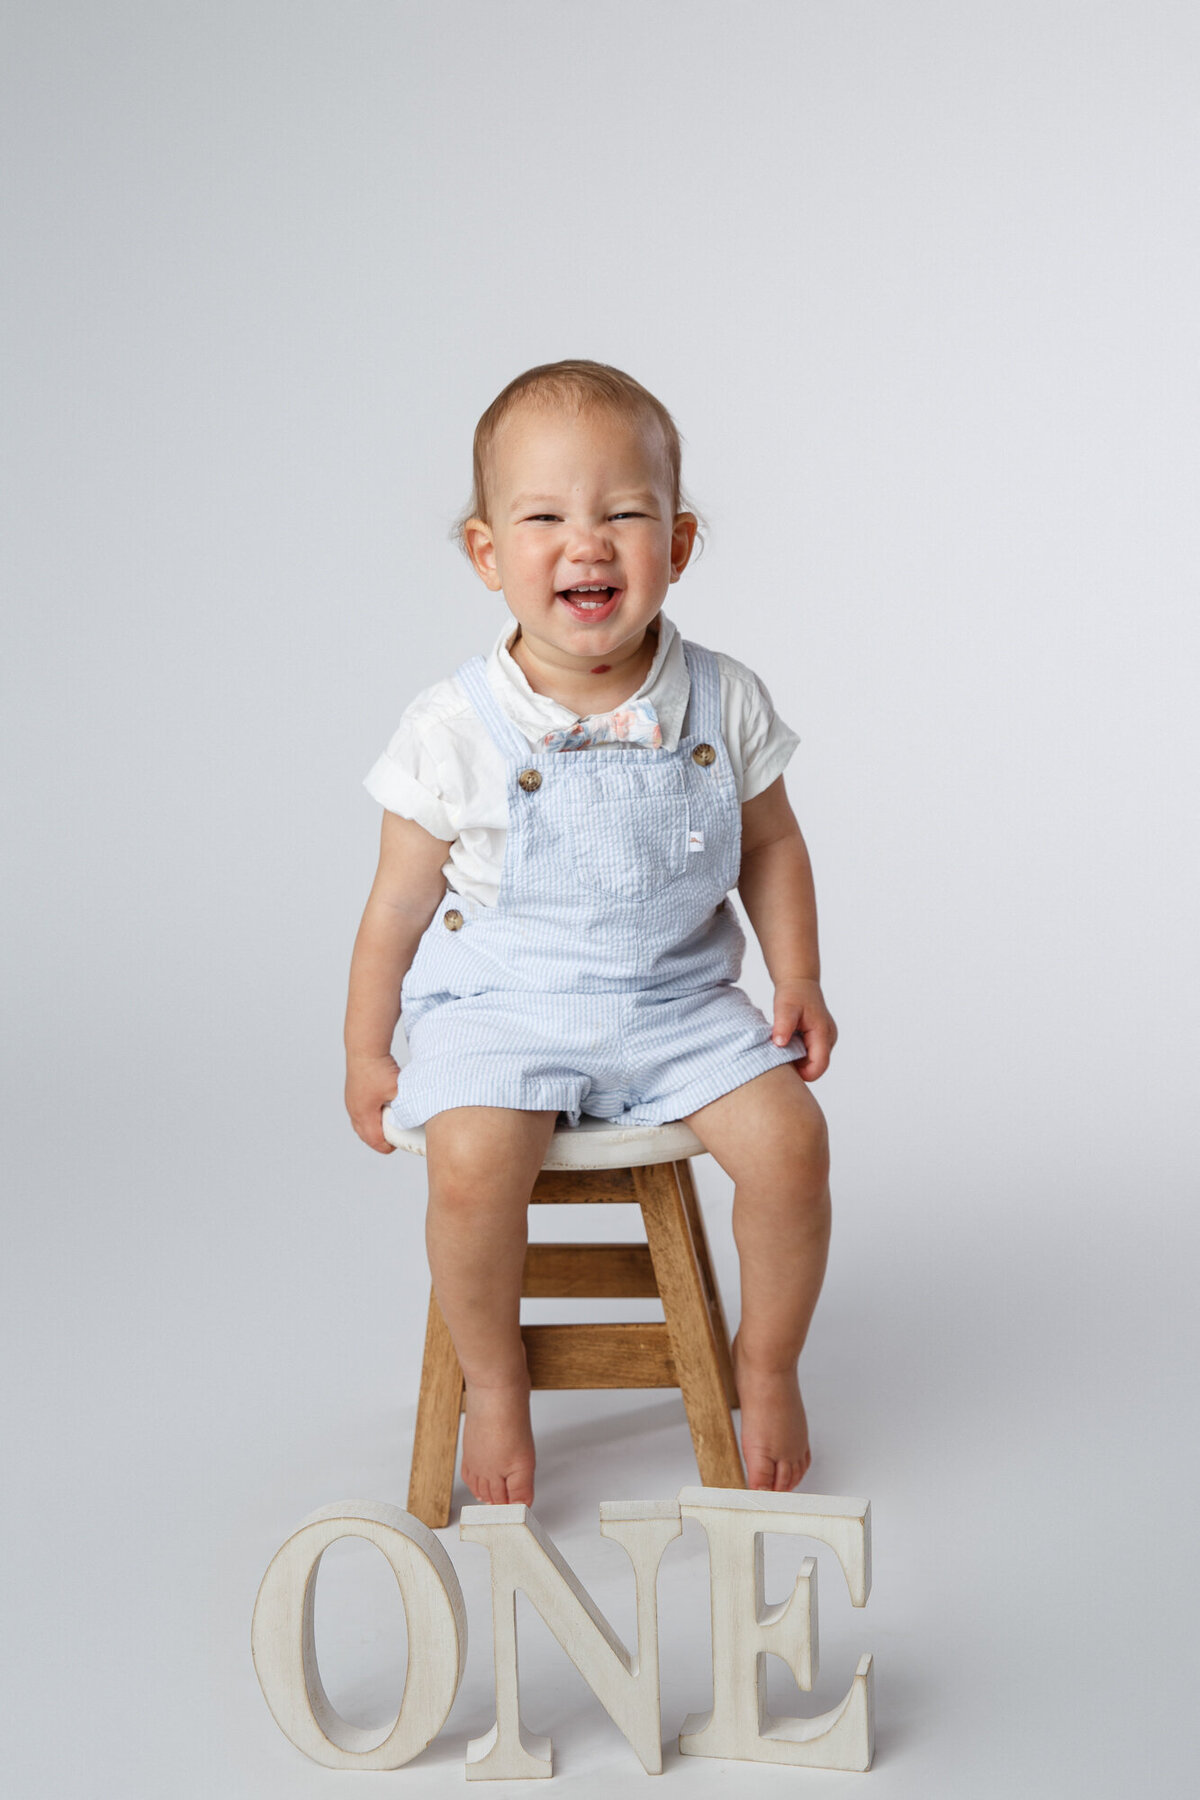 Cute one year old baby sitting on a stool smiling with the letters spelling one in the foreground